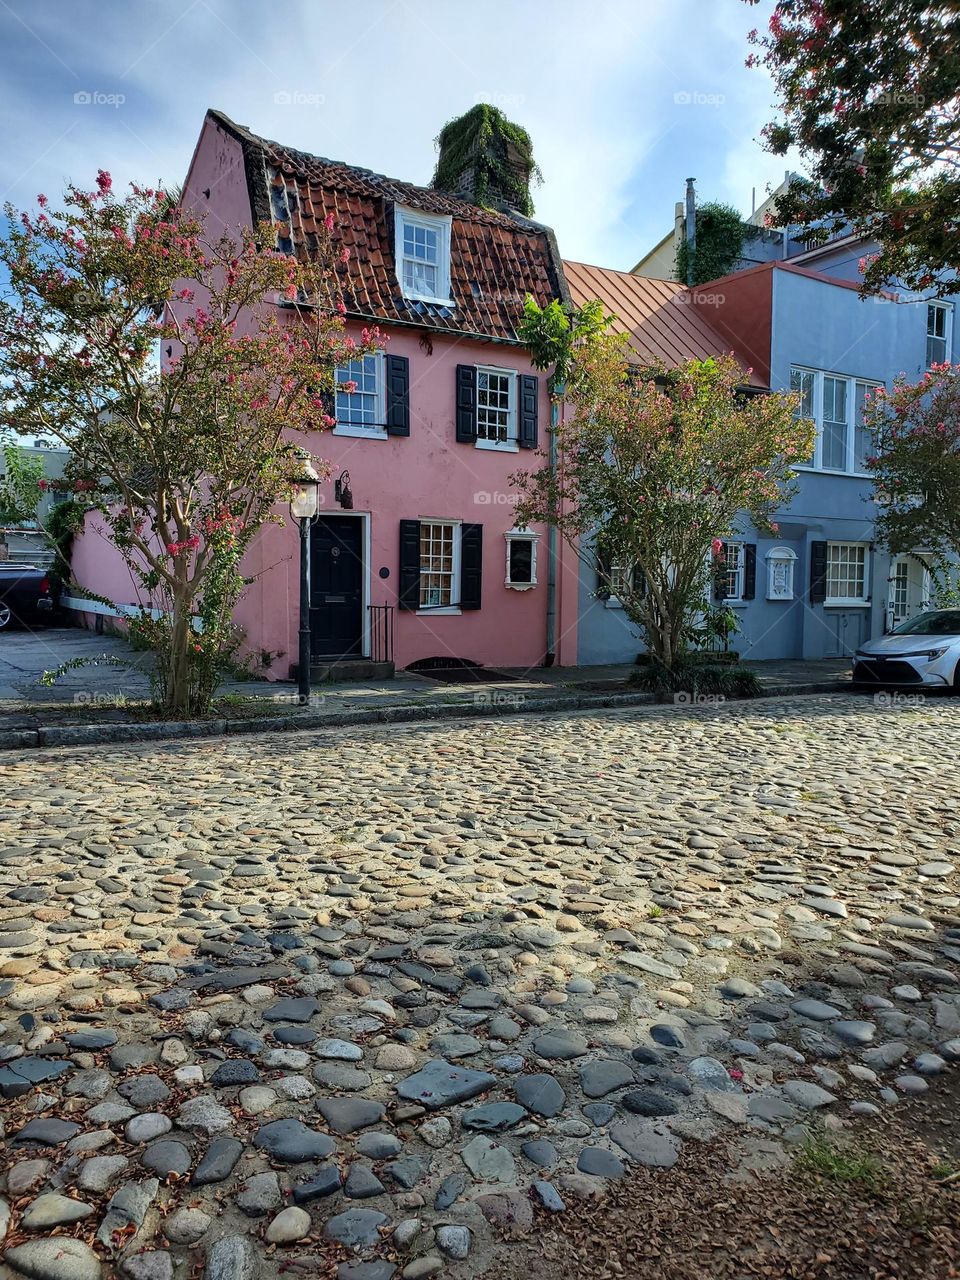 cobblestone street with houses